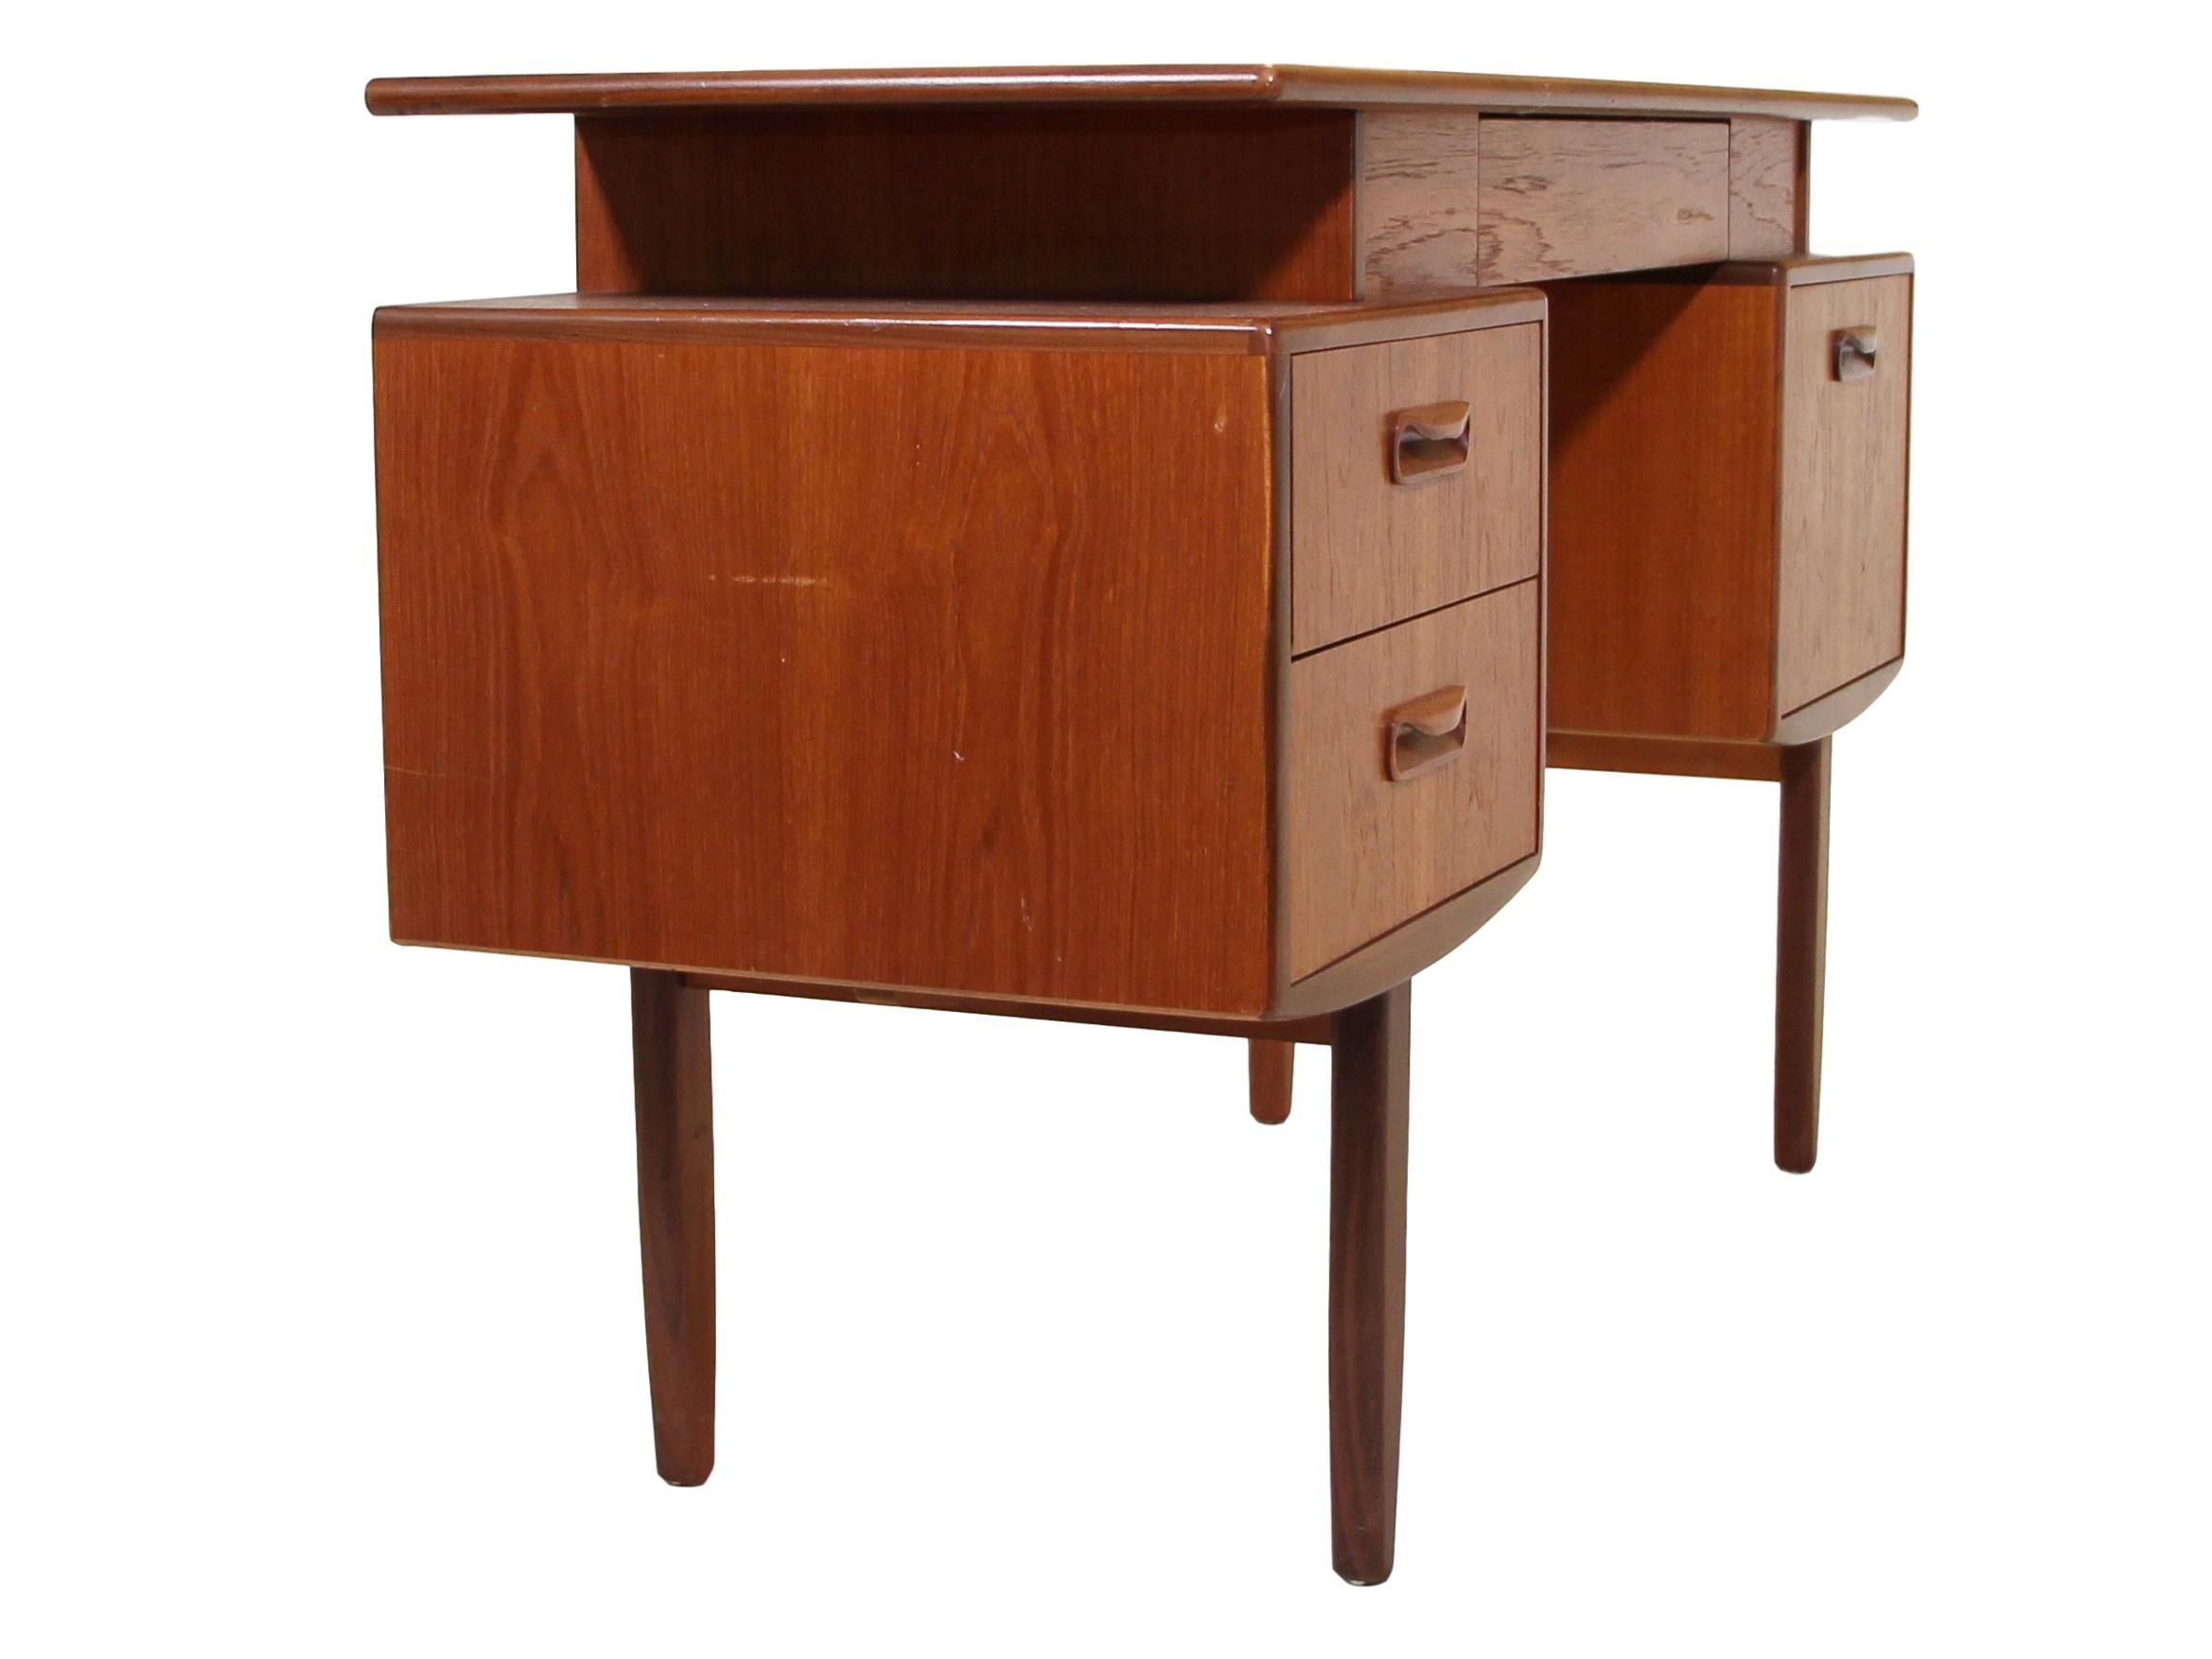 Midcentury teak vanity / desk. Danish modern in style. It features floating top design, 2 drawers on the left and a door and cabinet on the right. Secret drawer has original black fabric. Gorgeous continuous grain pattern on the front of the